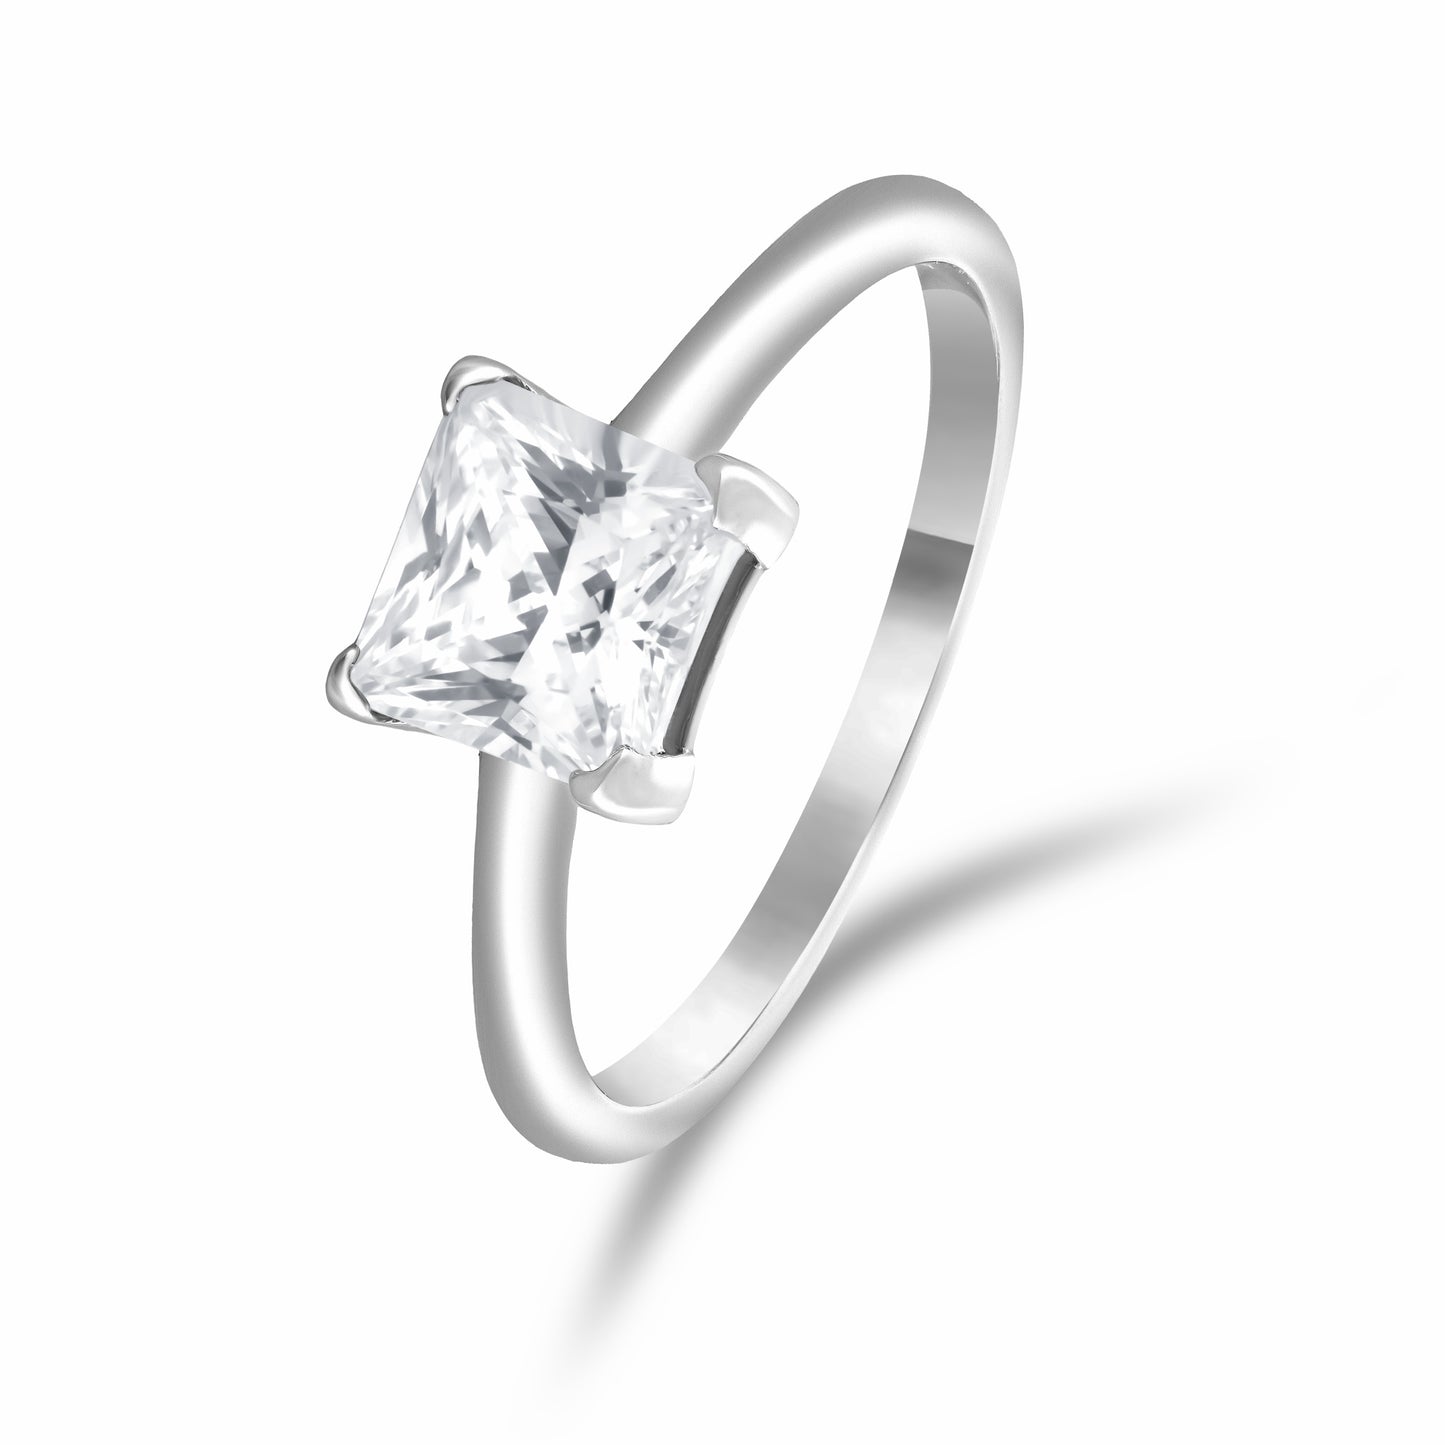 Princess Cut Silver Ring on white background